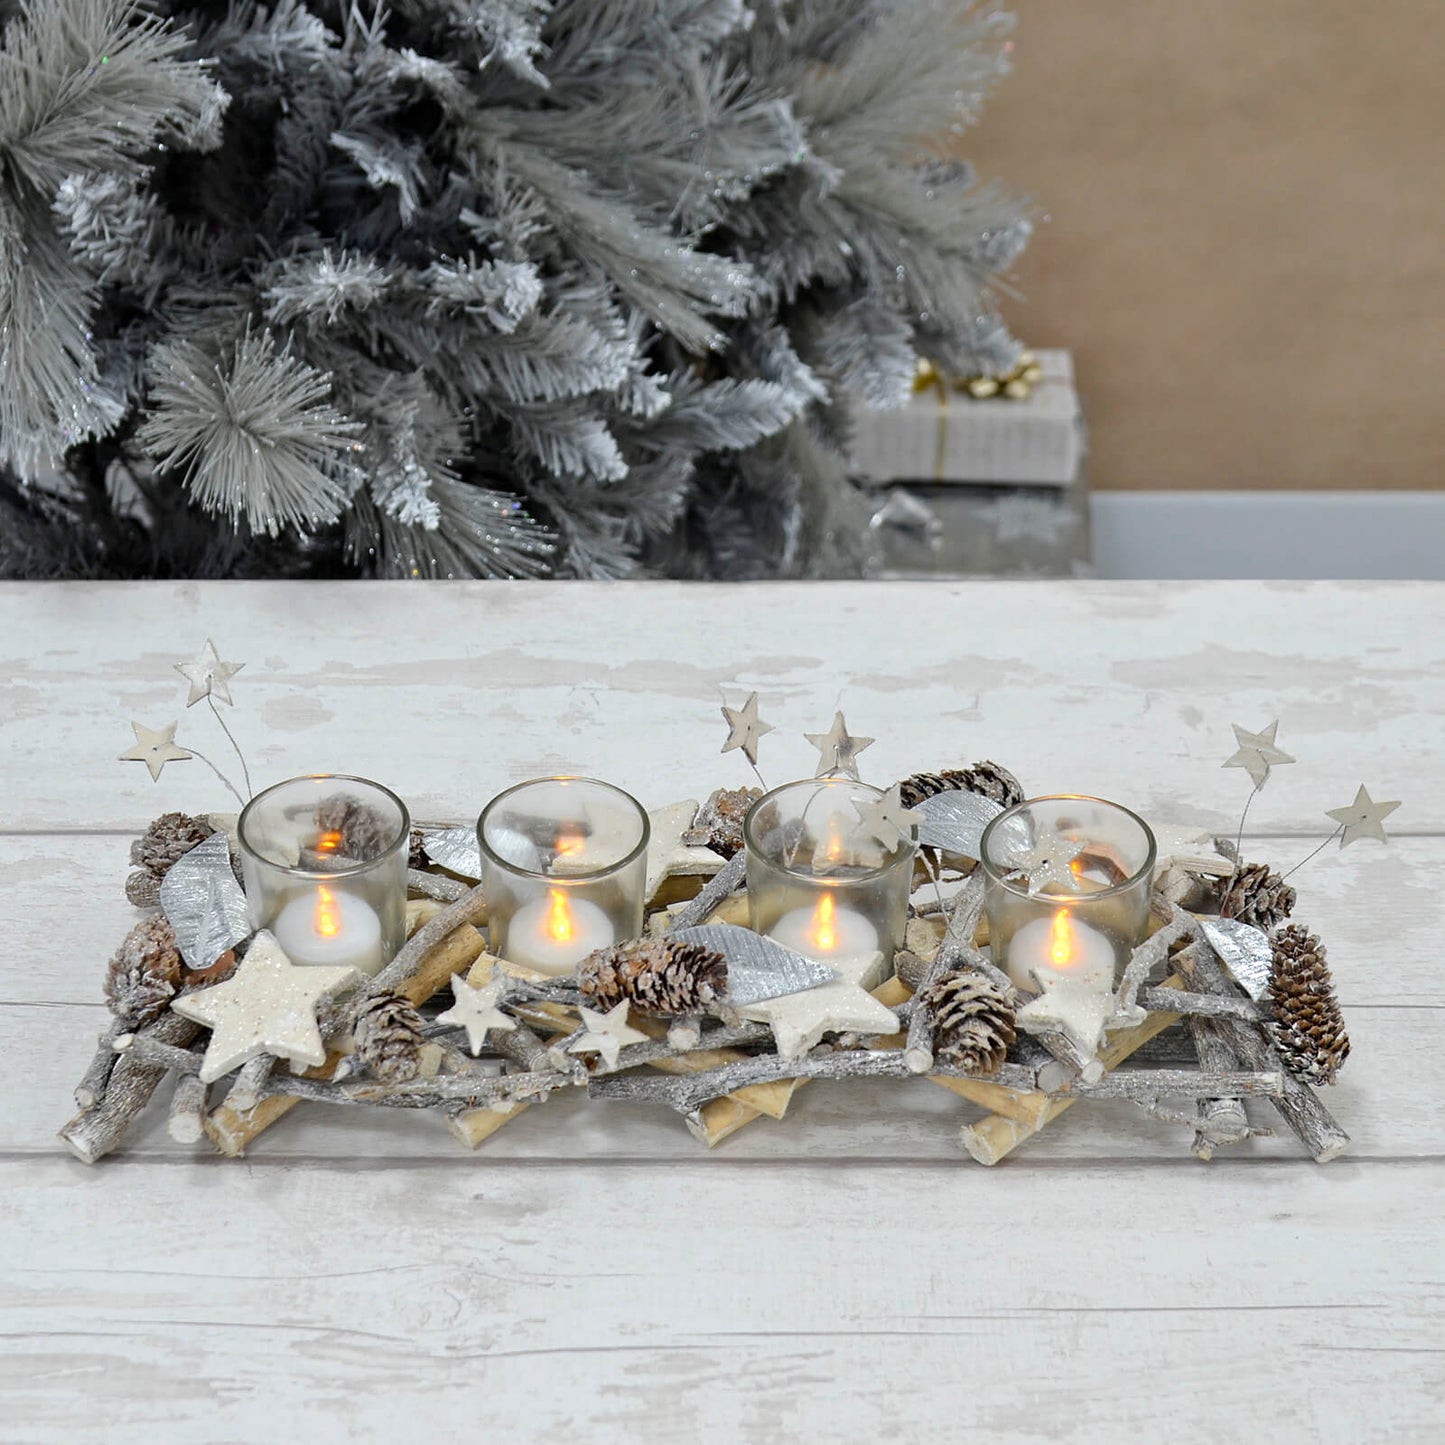 Mr Crimbo Christmas candle holder with twig base, 4 tea lights in glass jars, silver leaves, stars and pine cones